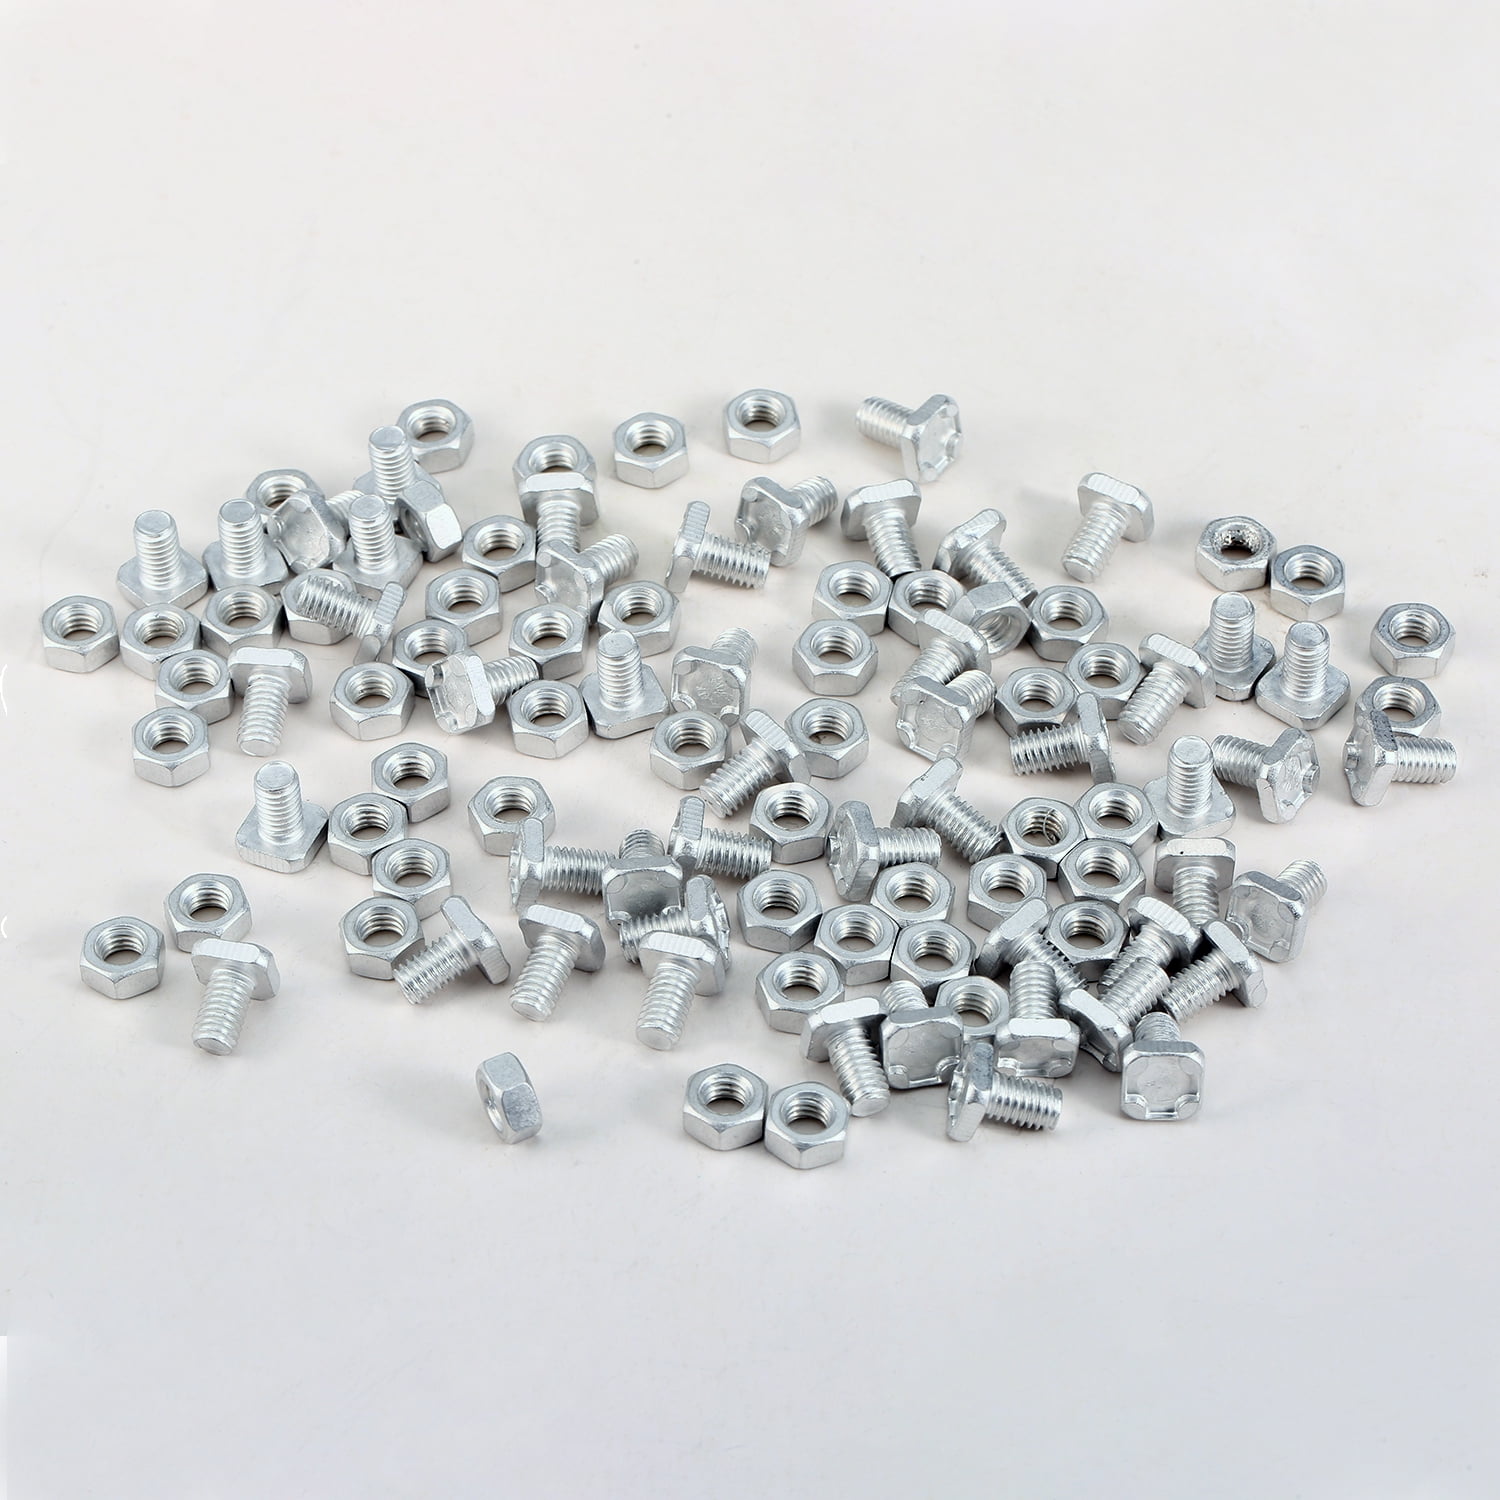 50Pairs Greenhouse M6 Nuts & Bolts Standard Size Replacements Aluminum Warehouse Parts Nuts & Bolts Accessories 